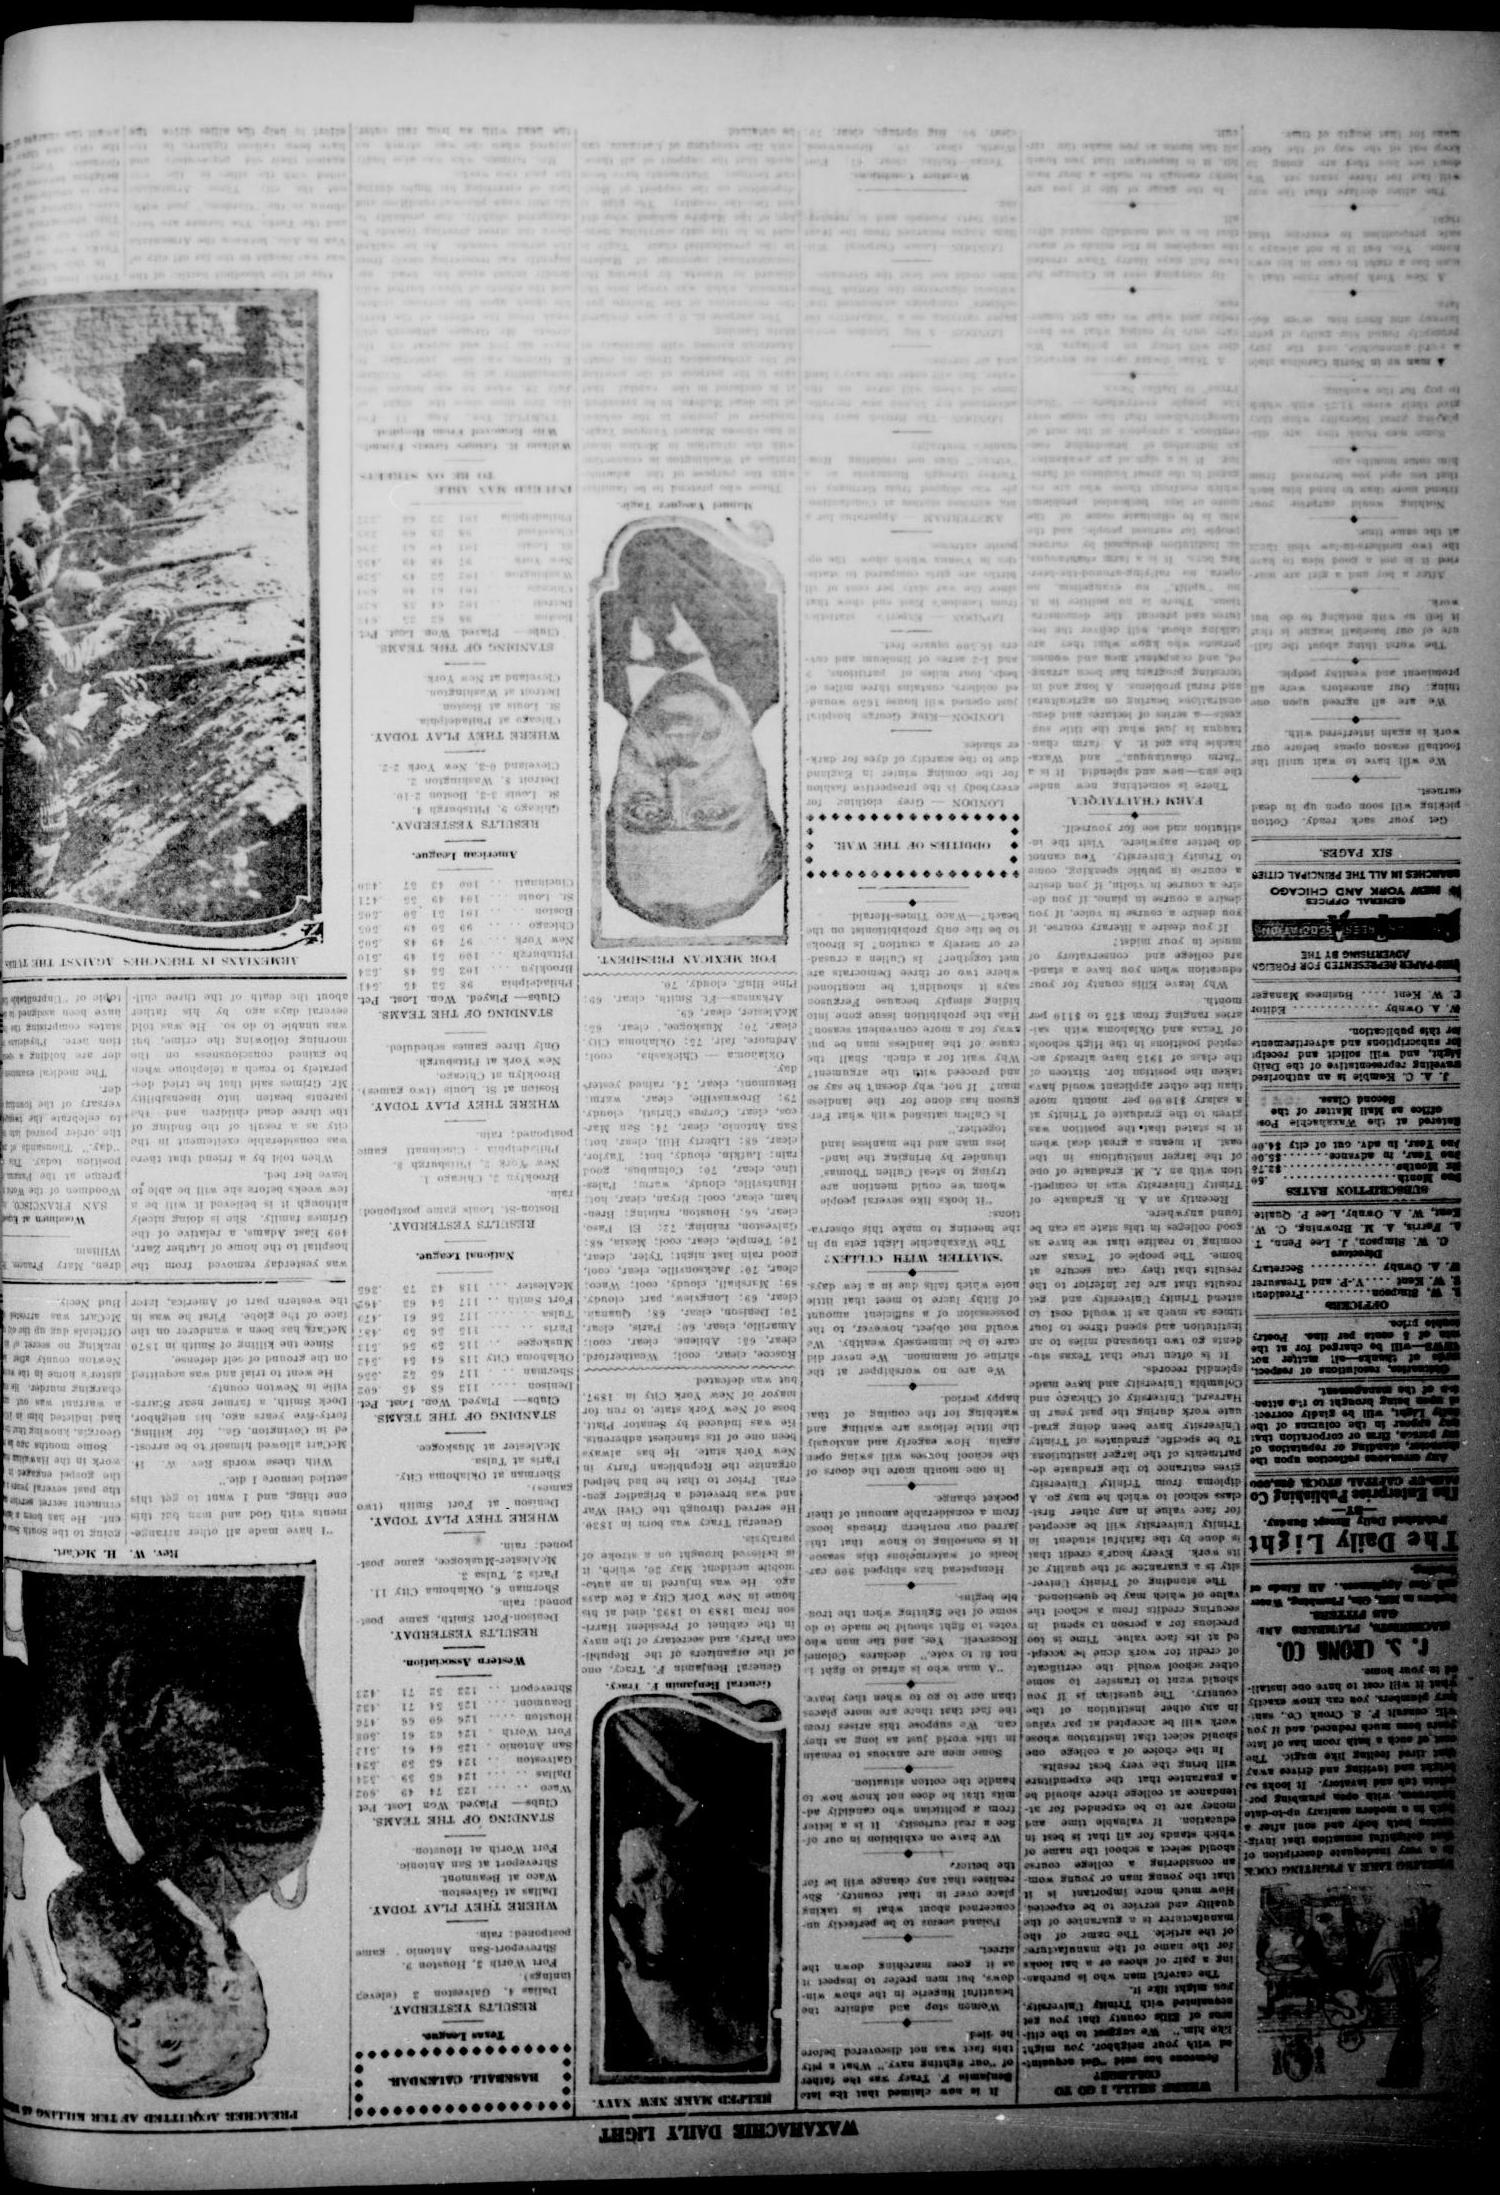 Waxahachie Daily Light (Waxahachie, Tex.), Vol. 23, No. 119, Ed. 1 Wednesday, August 11, 1915
                                                
                                                    [Sequence #]: 4 of 6
                                                